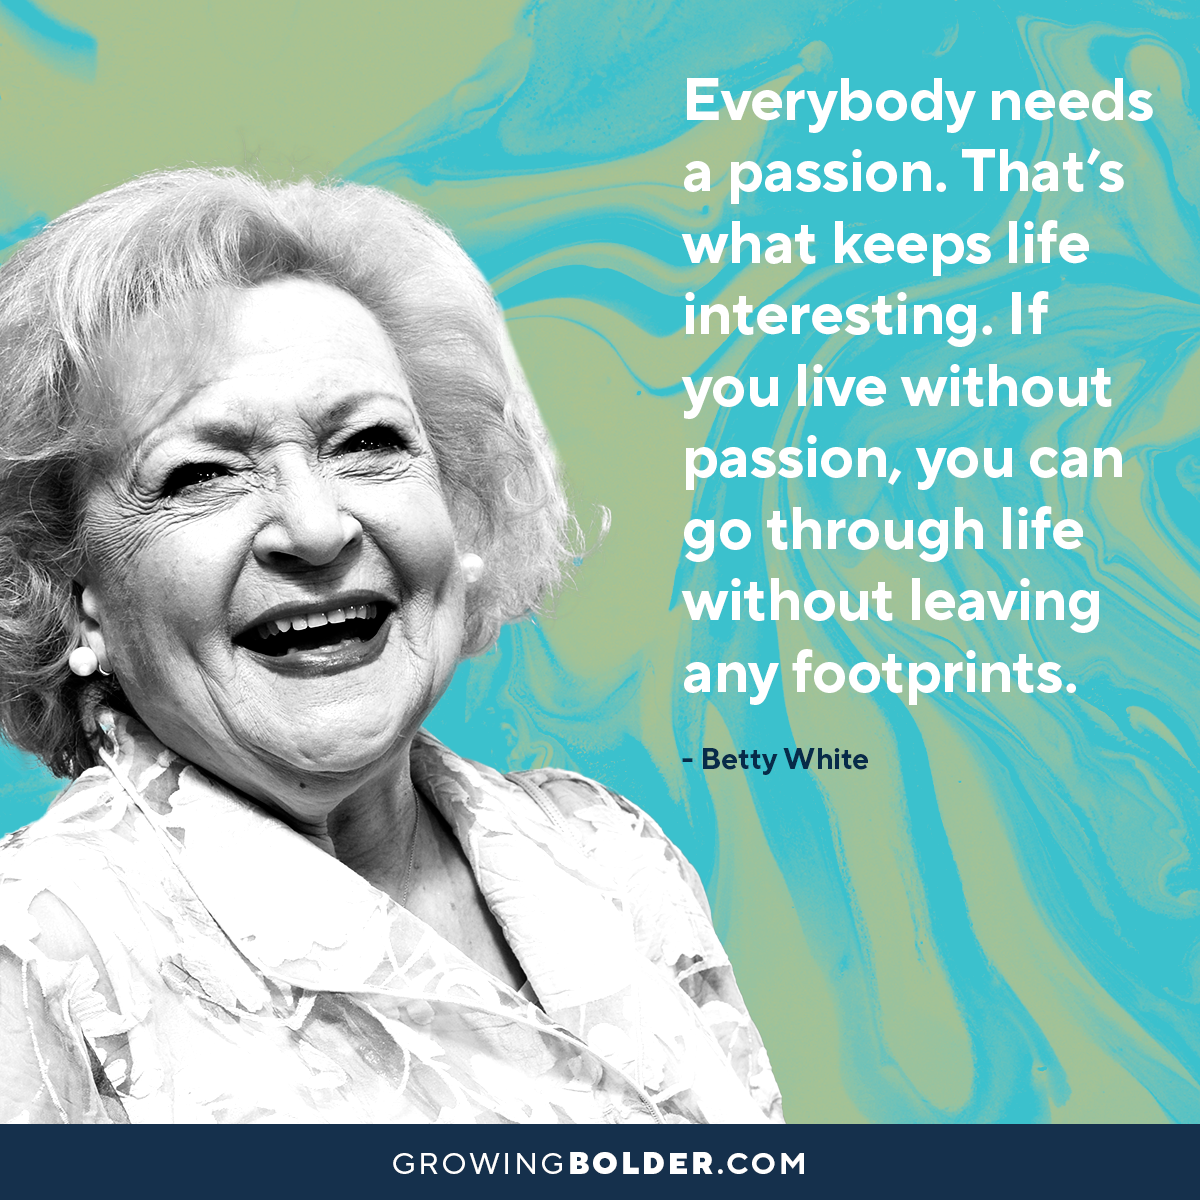 Betty white butterfly quote